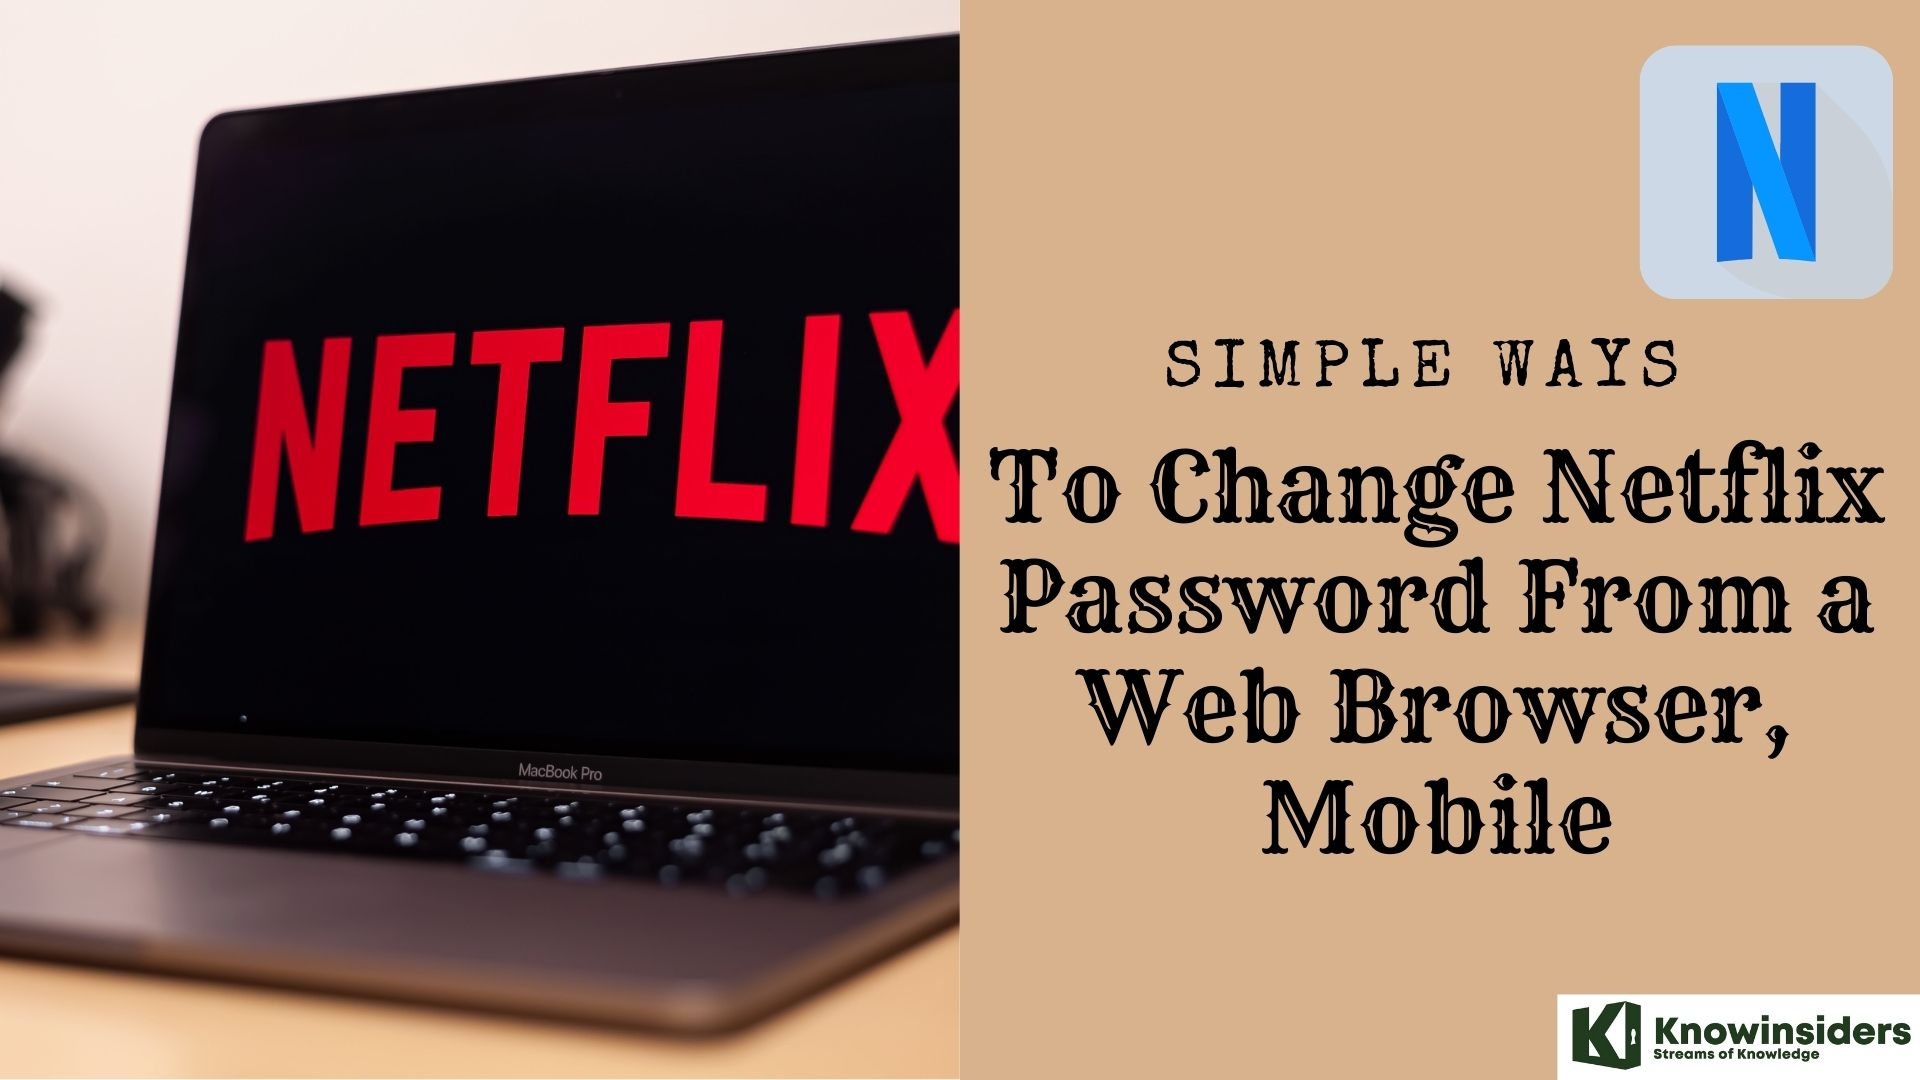 Simple ways To Change Netflix Password From a Web Browser, Mobile